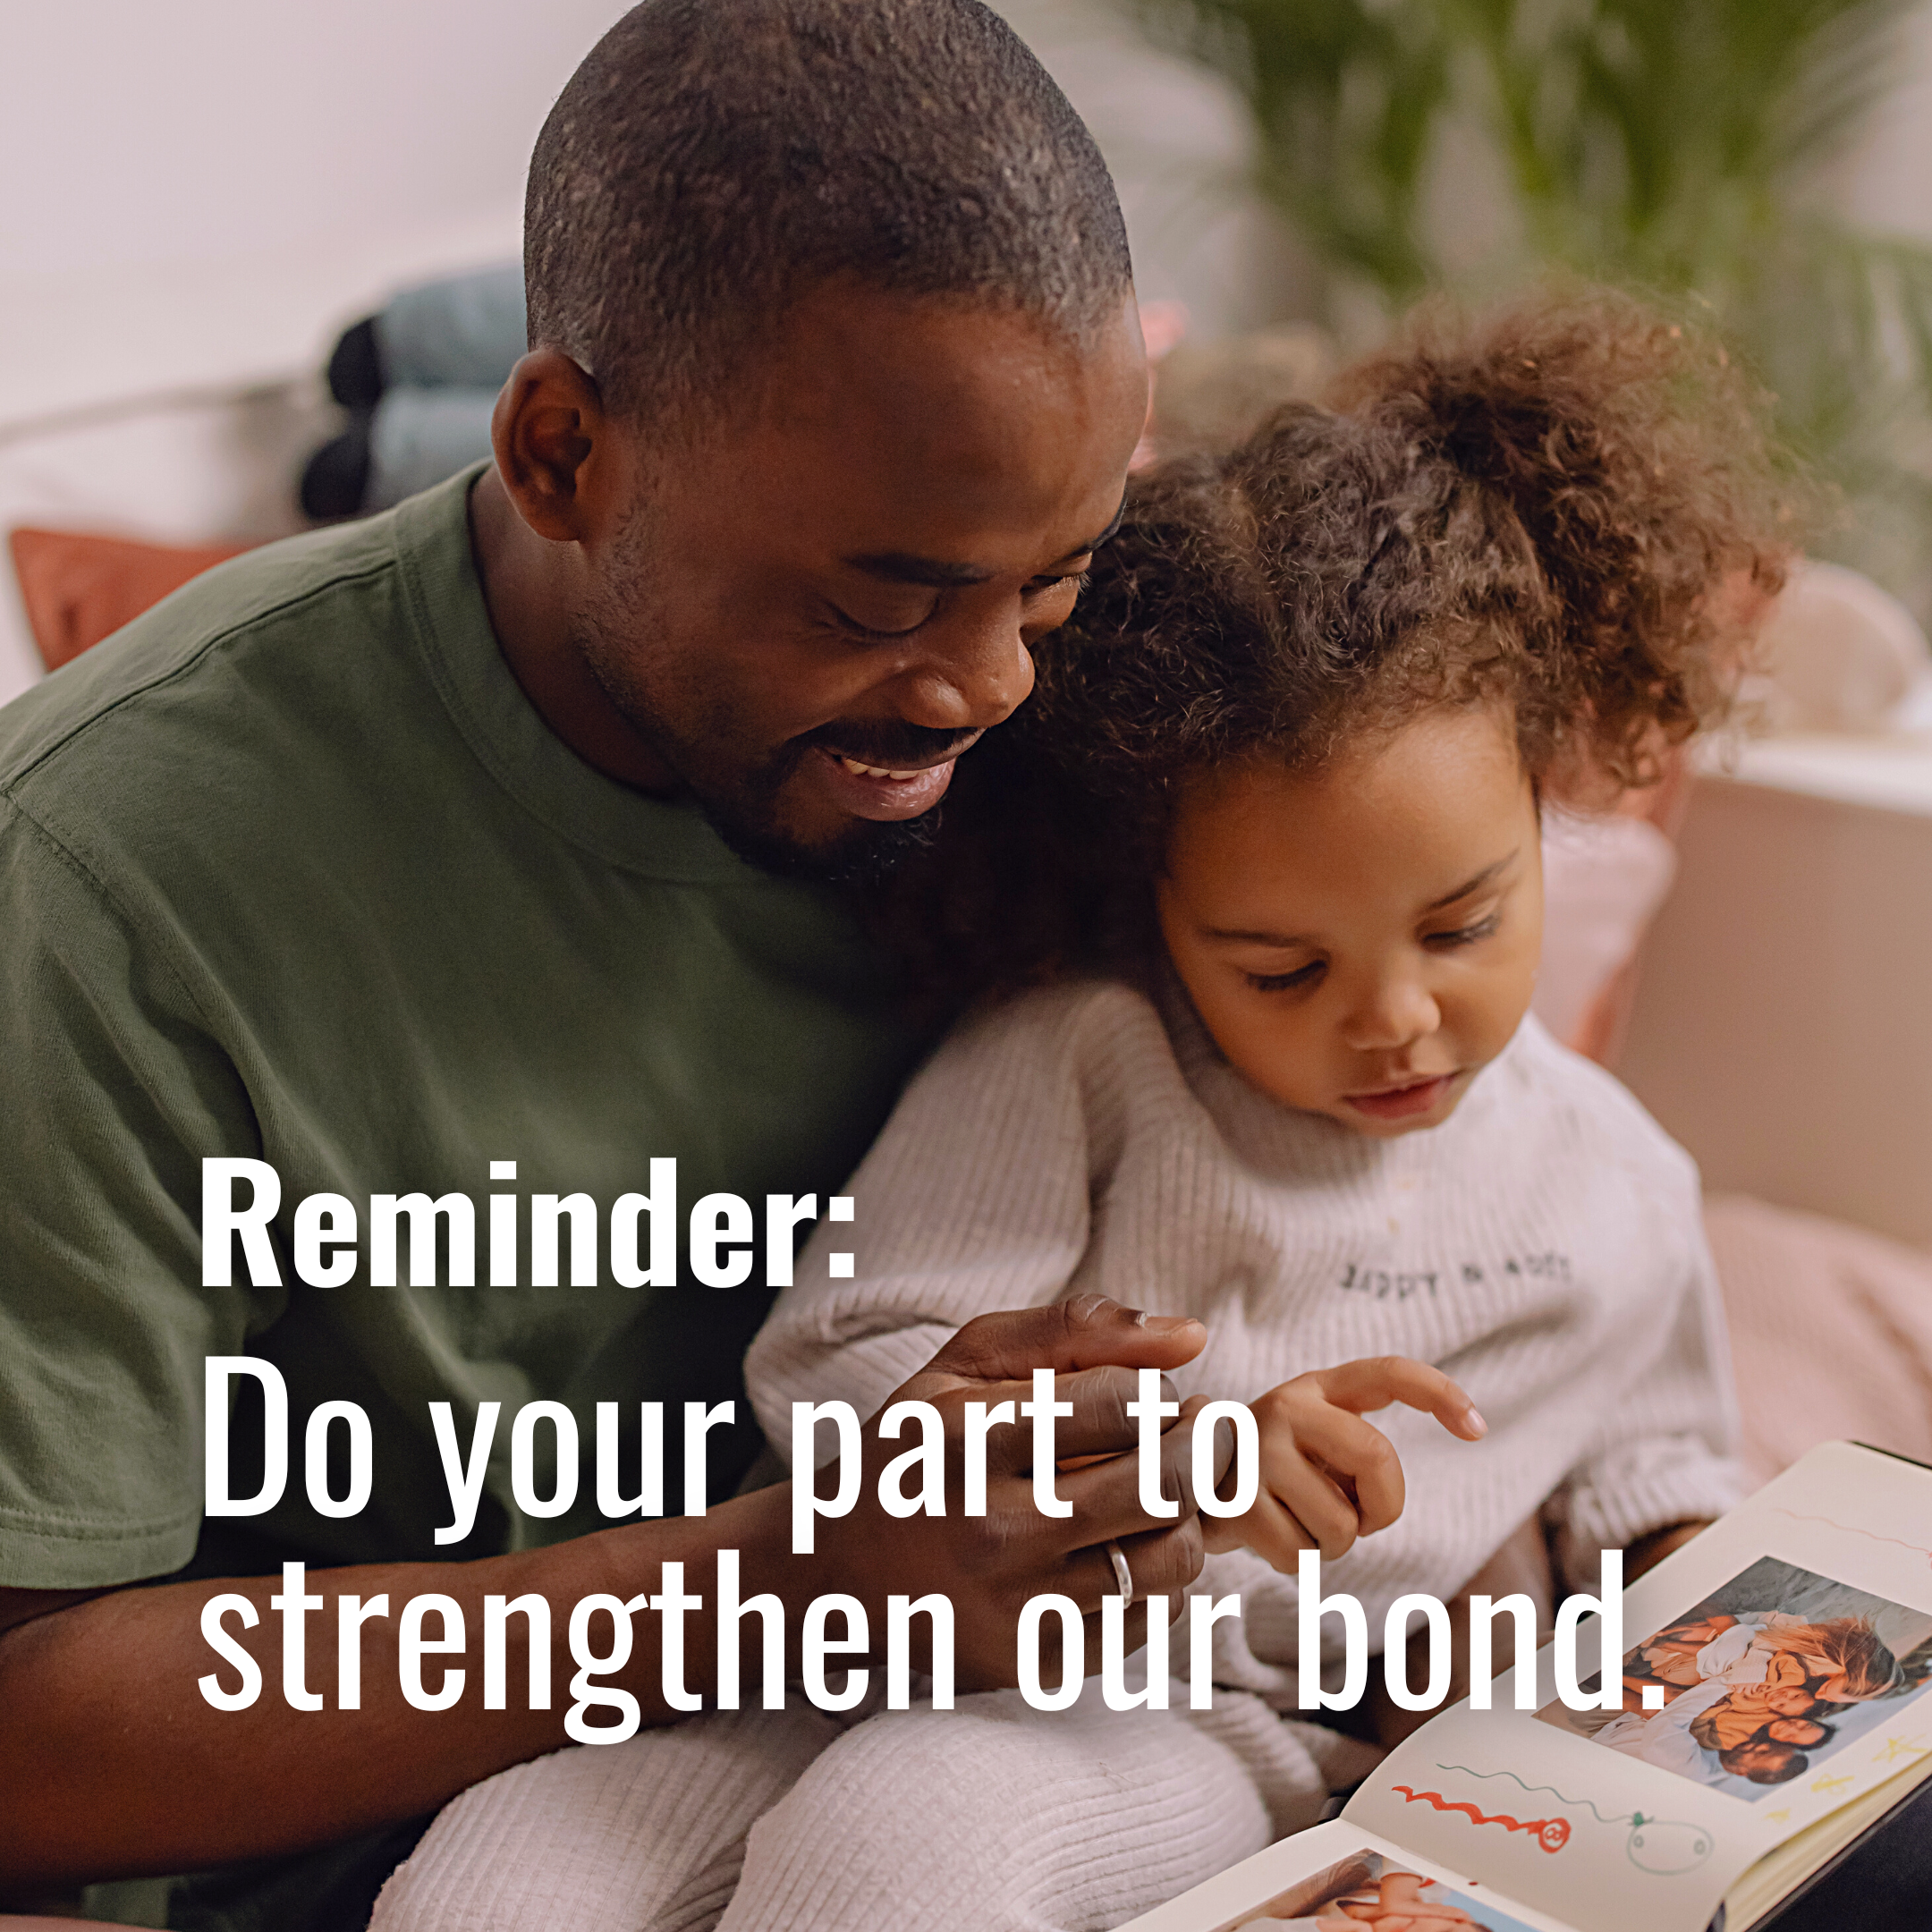 Do your part to strengthen our bond 💪